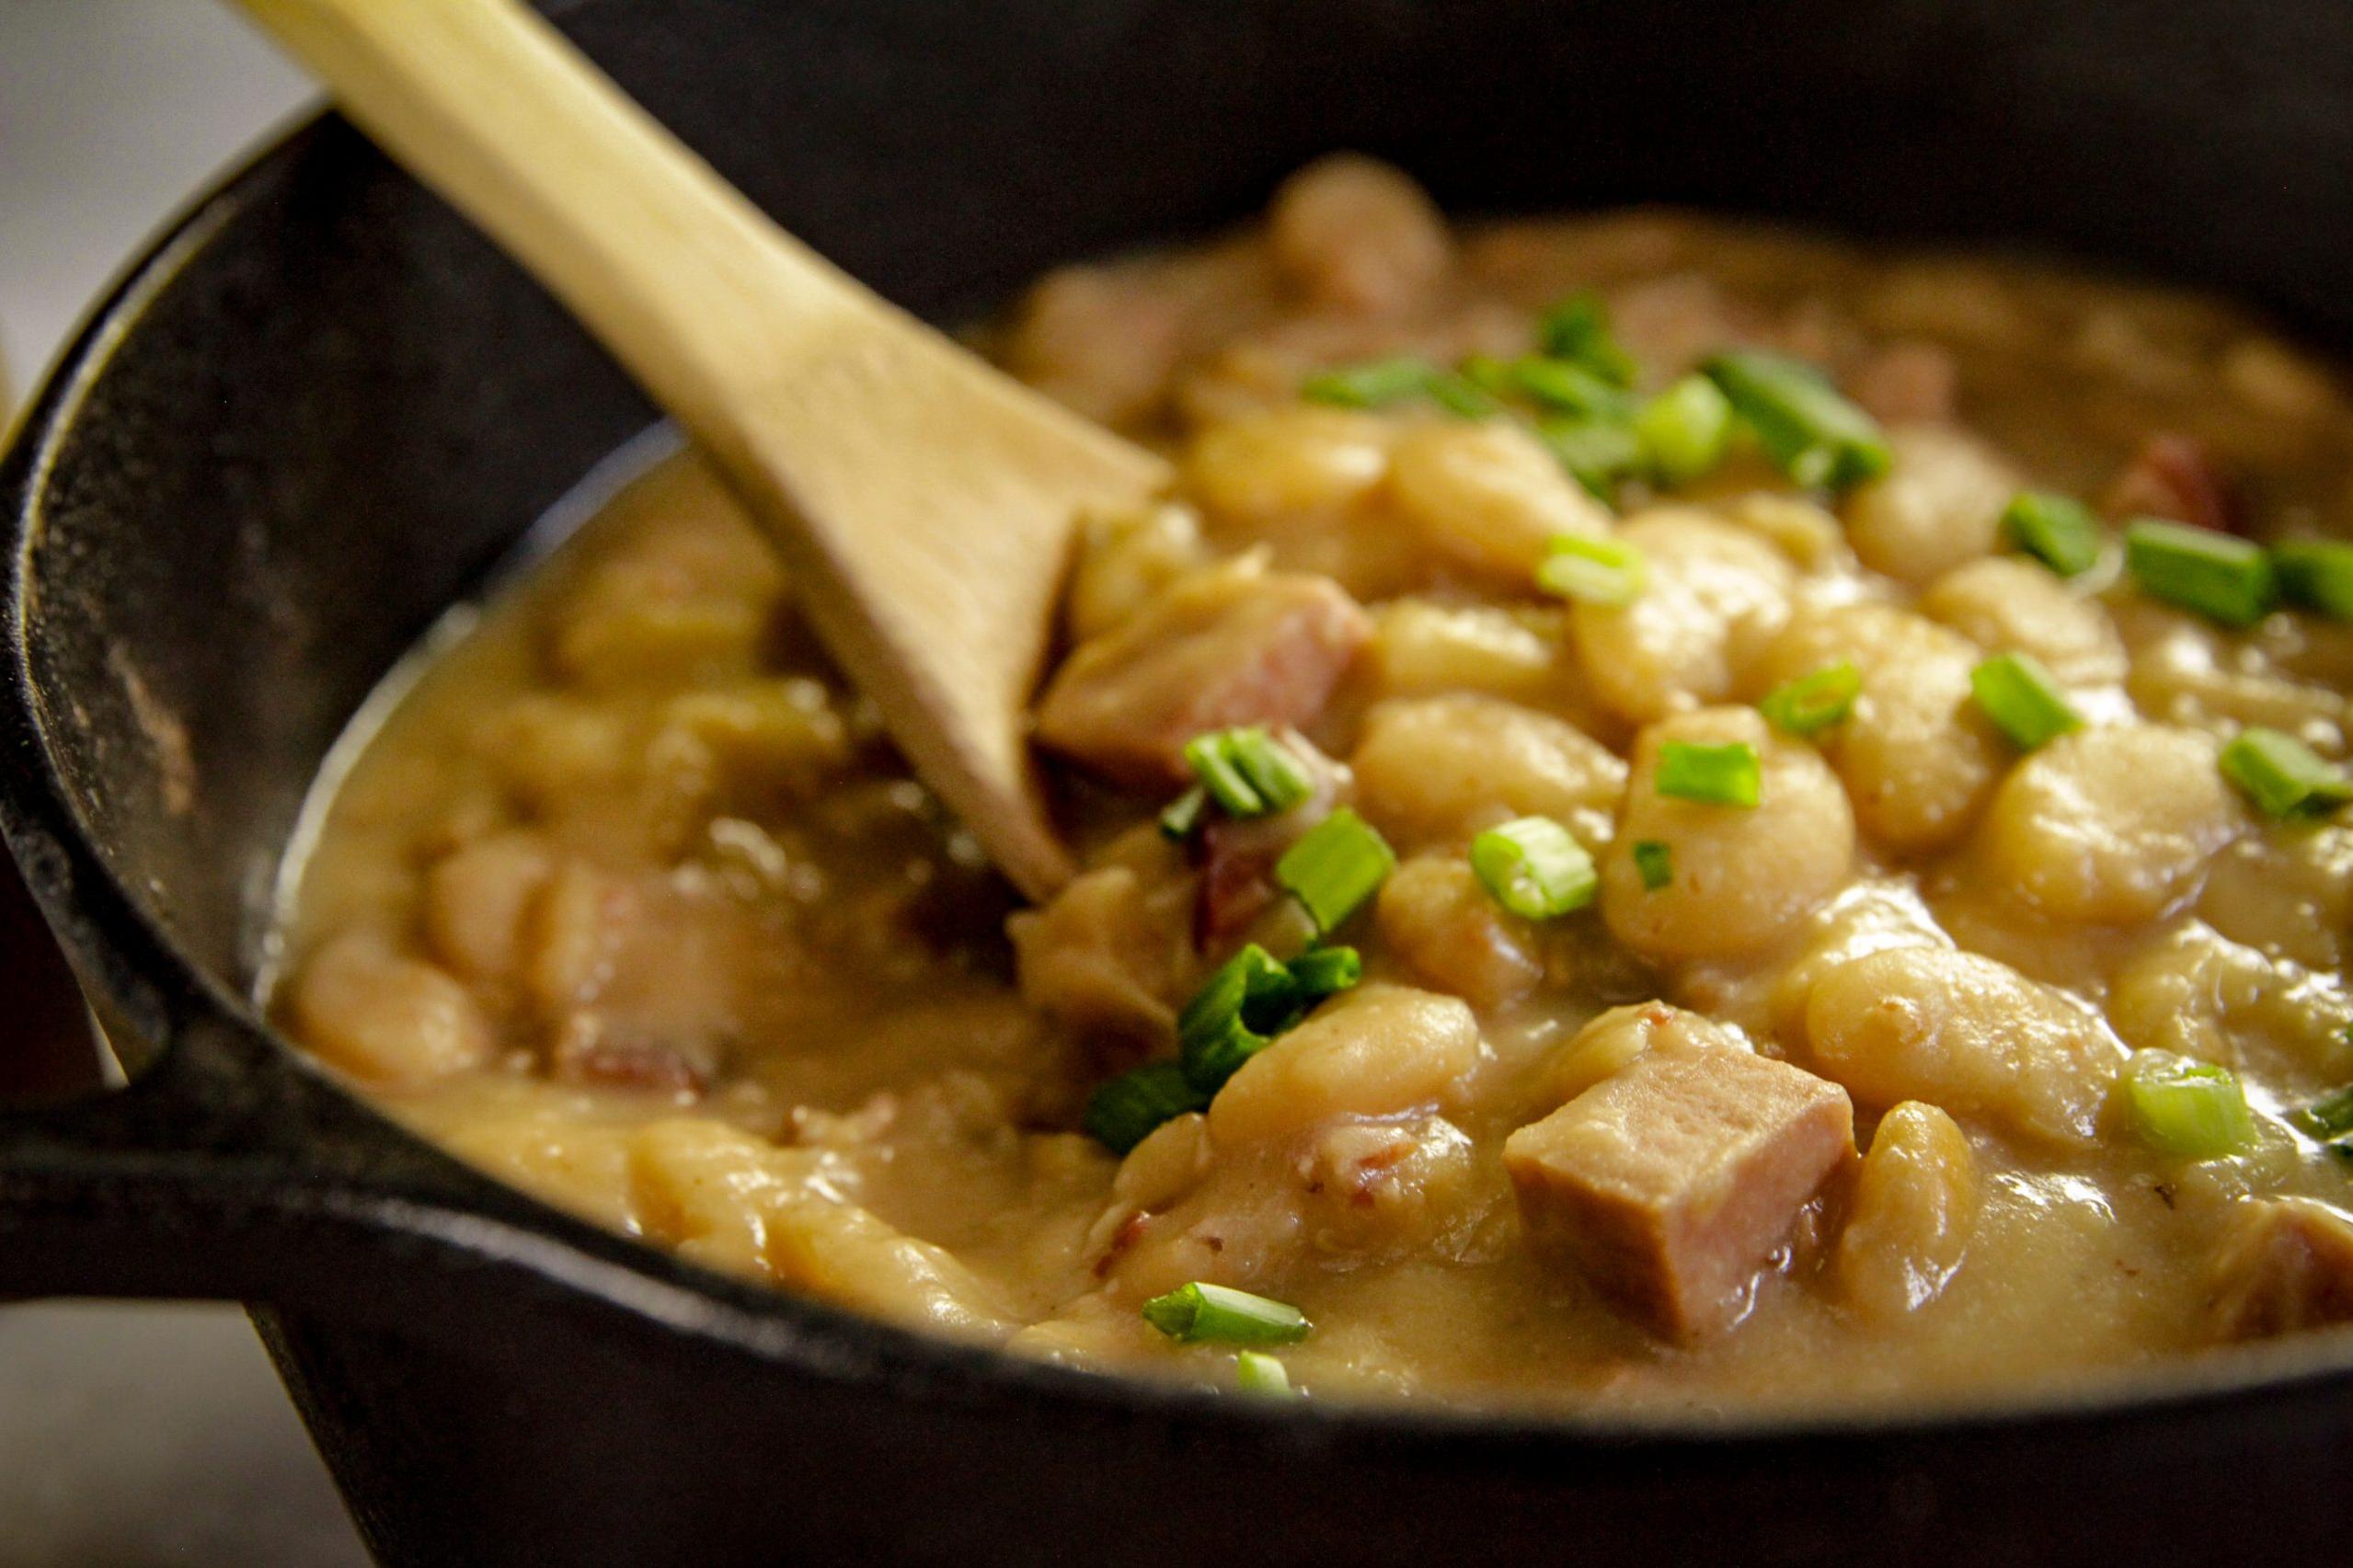  This recipe is proof that lima beans can indeed be delicious.